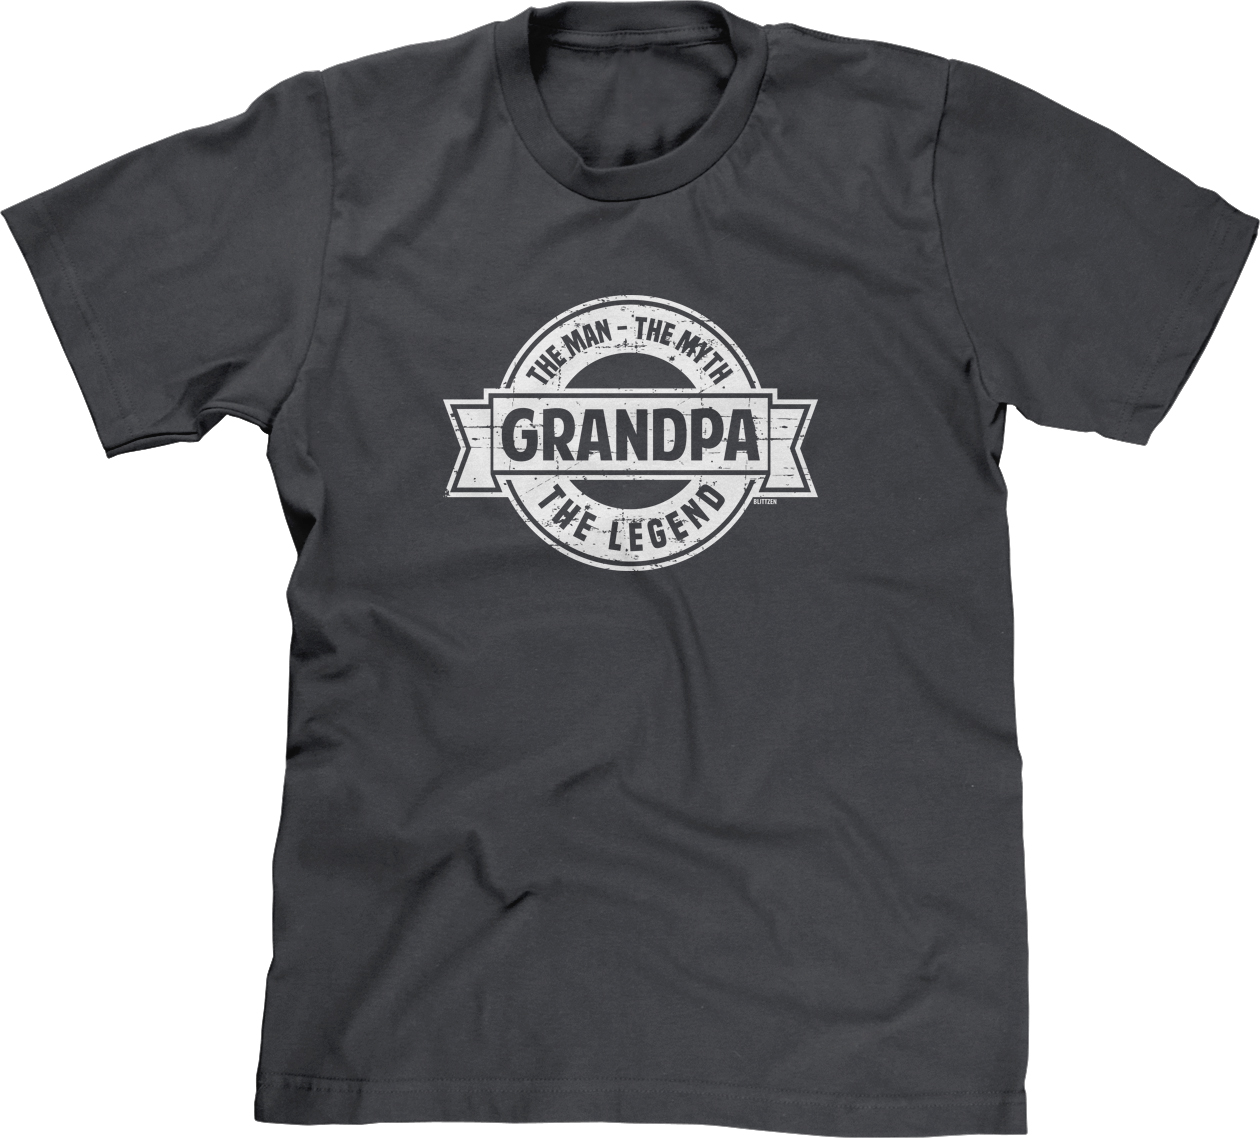 The Man The Myth The Legend Grandpa Granddad Fathers Day Present Gift Mens Tee 